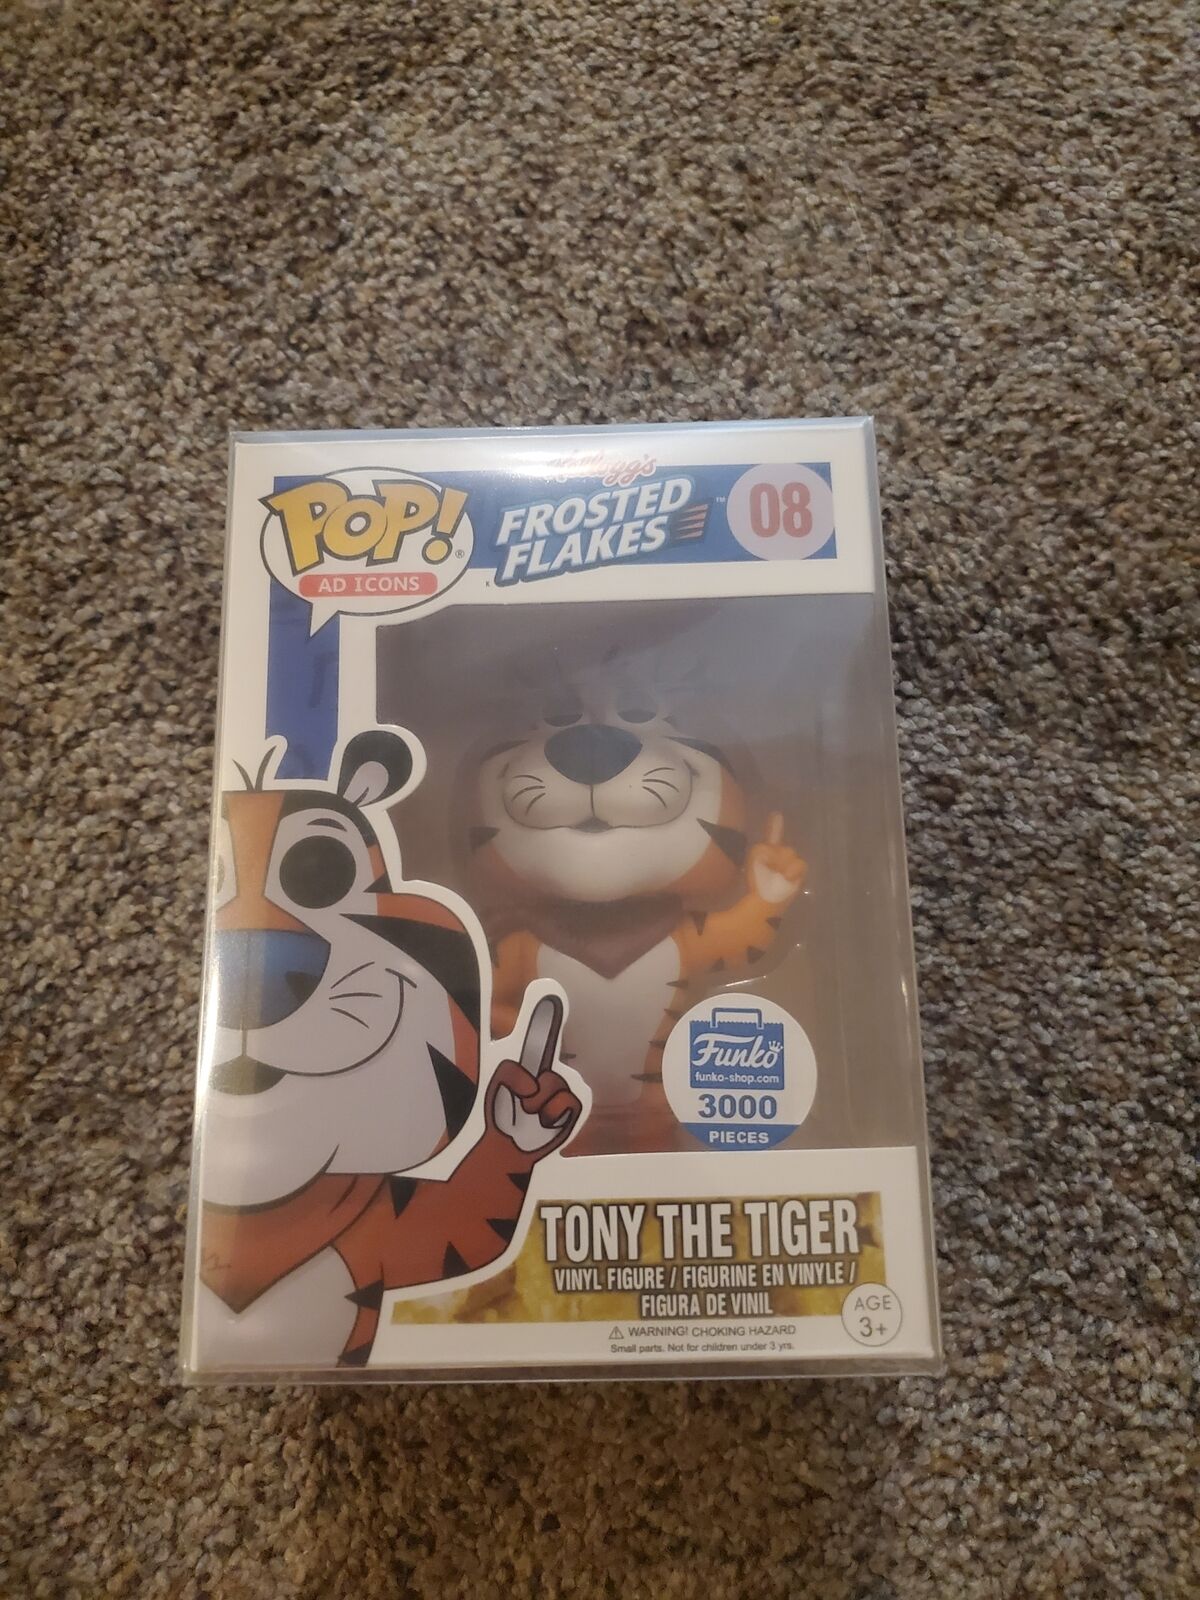 Tony The Tiger #08  Funko Pop Ad Icons Frosted Flakes LE 3000 Exclusive Figure